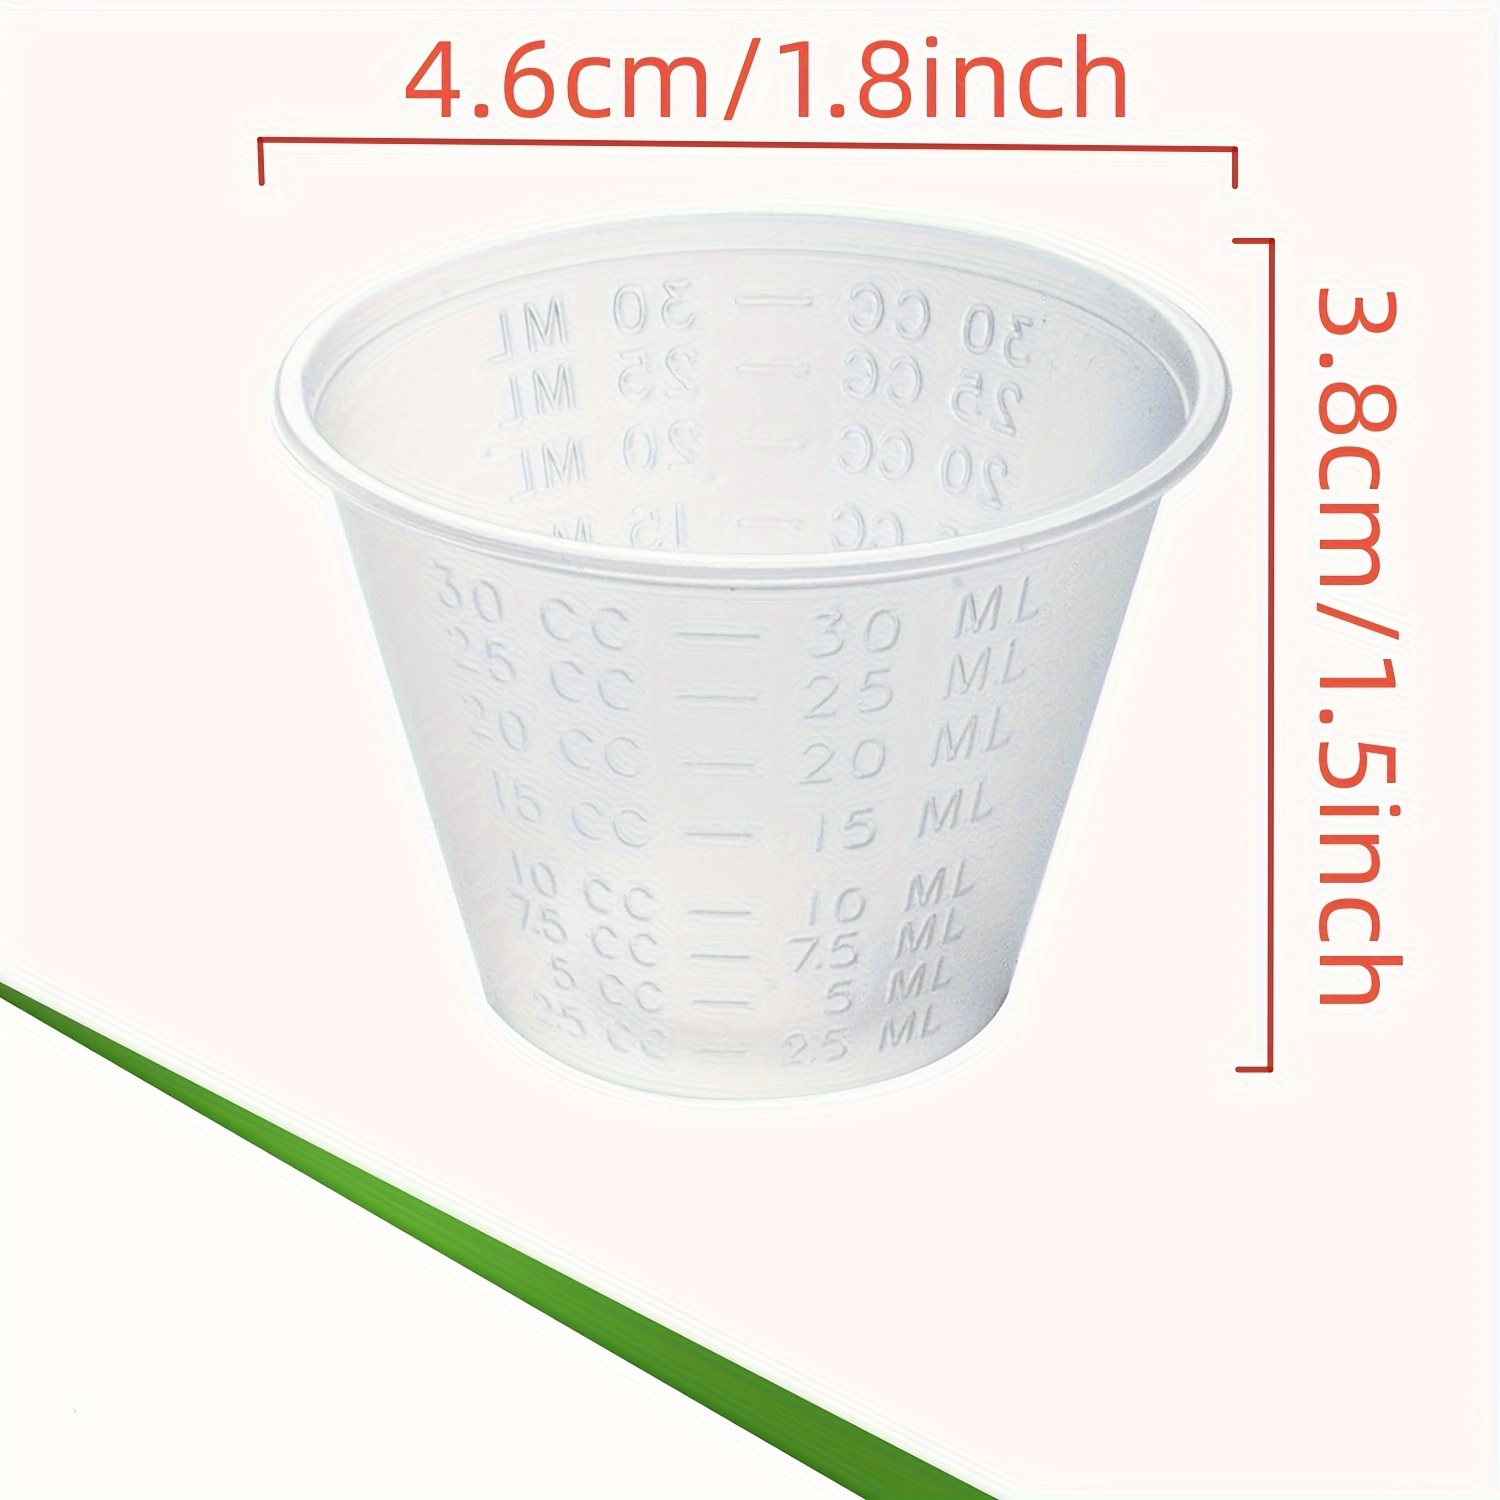 AN Measuring Cup 25 ml